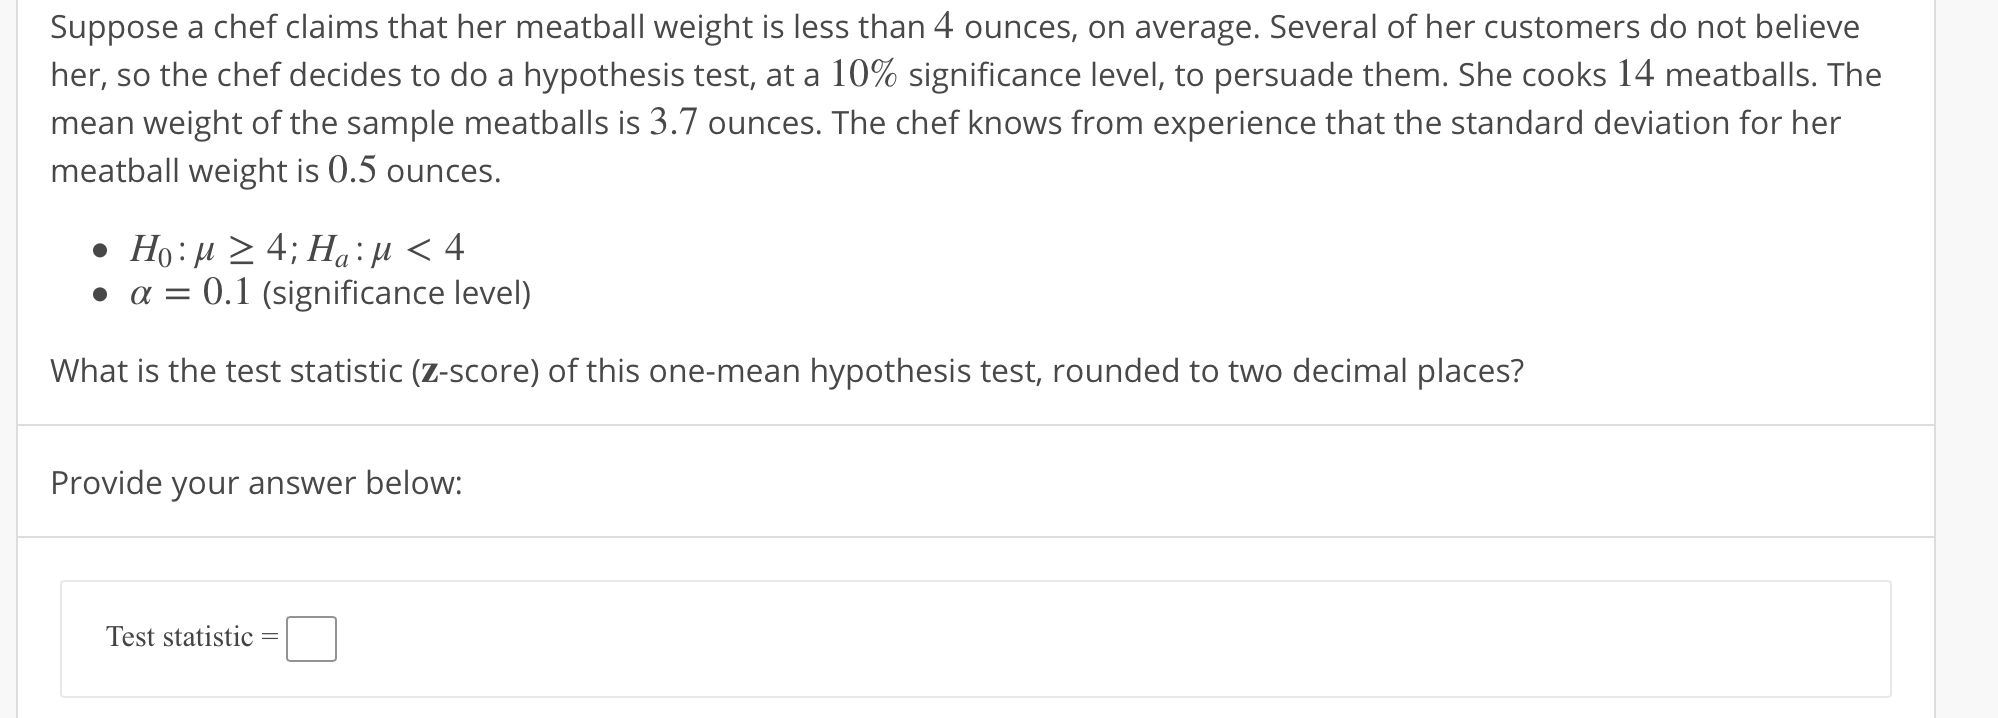 Suppose a chef claims that her meatball weight is less than 4 ounces, on average. Several of her customers do not believe
her, so the chef decides to do a hypothesis test, at a 10% significance level, to persuade them. She cooks 14 meatballs. The
mean weight of the sample meatballs is 3.7 ounces. The chef knows from experience that the standard deviation for her
meatball weight is 0.5 ounces.
. α-: 0.1 (significance level)
What is the test statistic (z-score) of this one-mean hypothesis test, rounded to two decimal places?
Provide your answer below:
Test statistic
